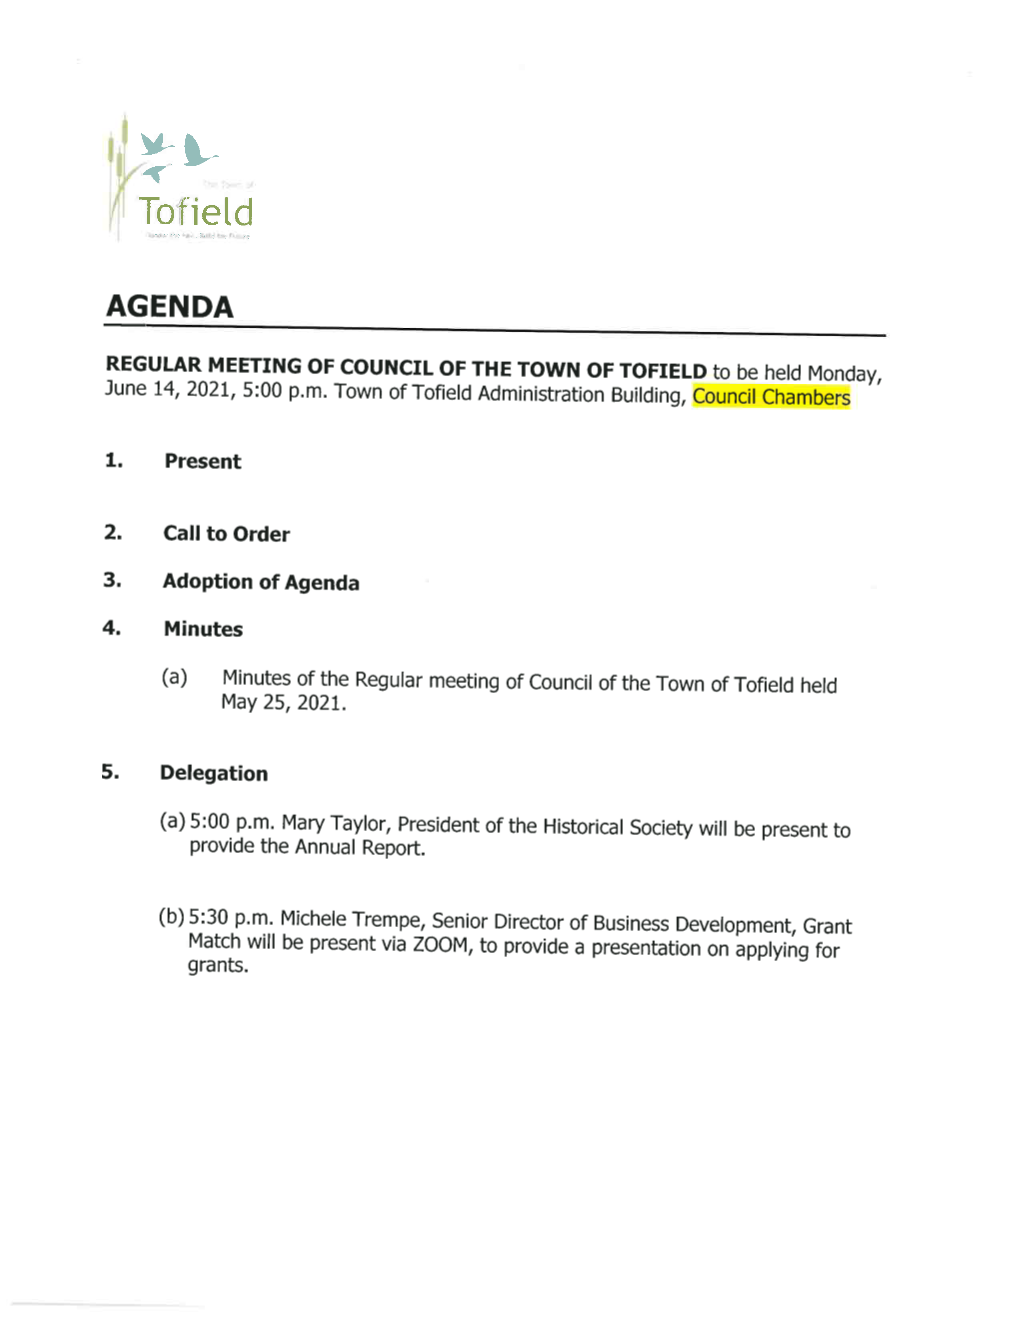 TOWN of TOFIELD to Be Held Monday, June 14, 2021, 5:00 P.M